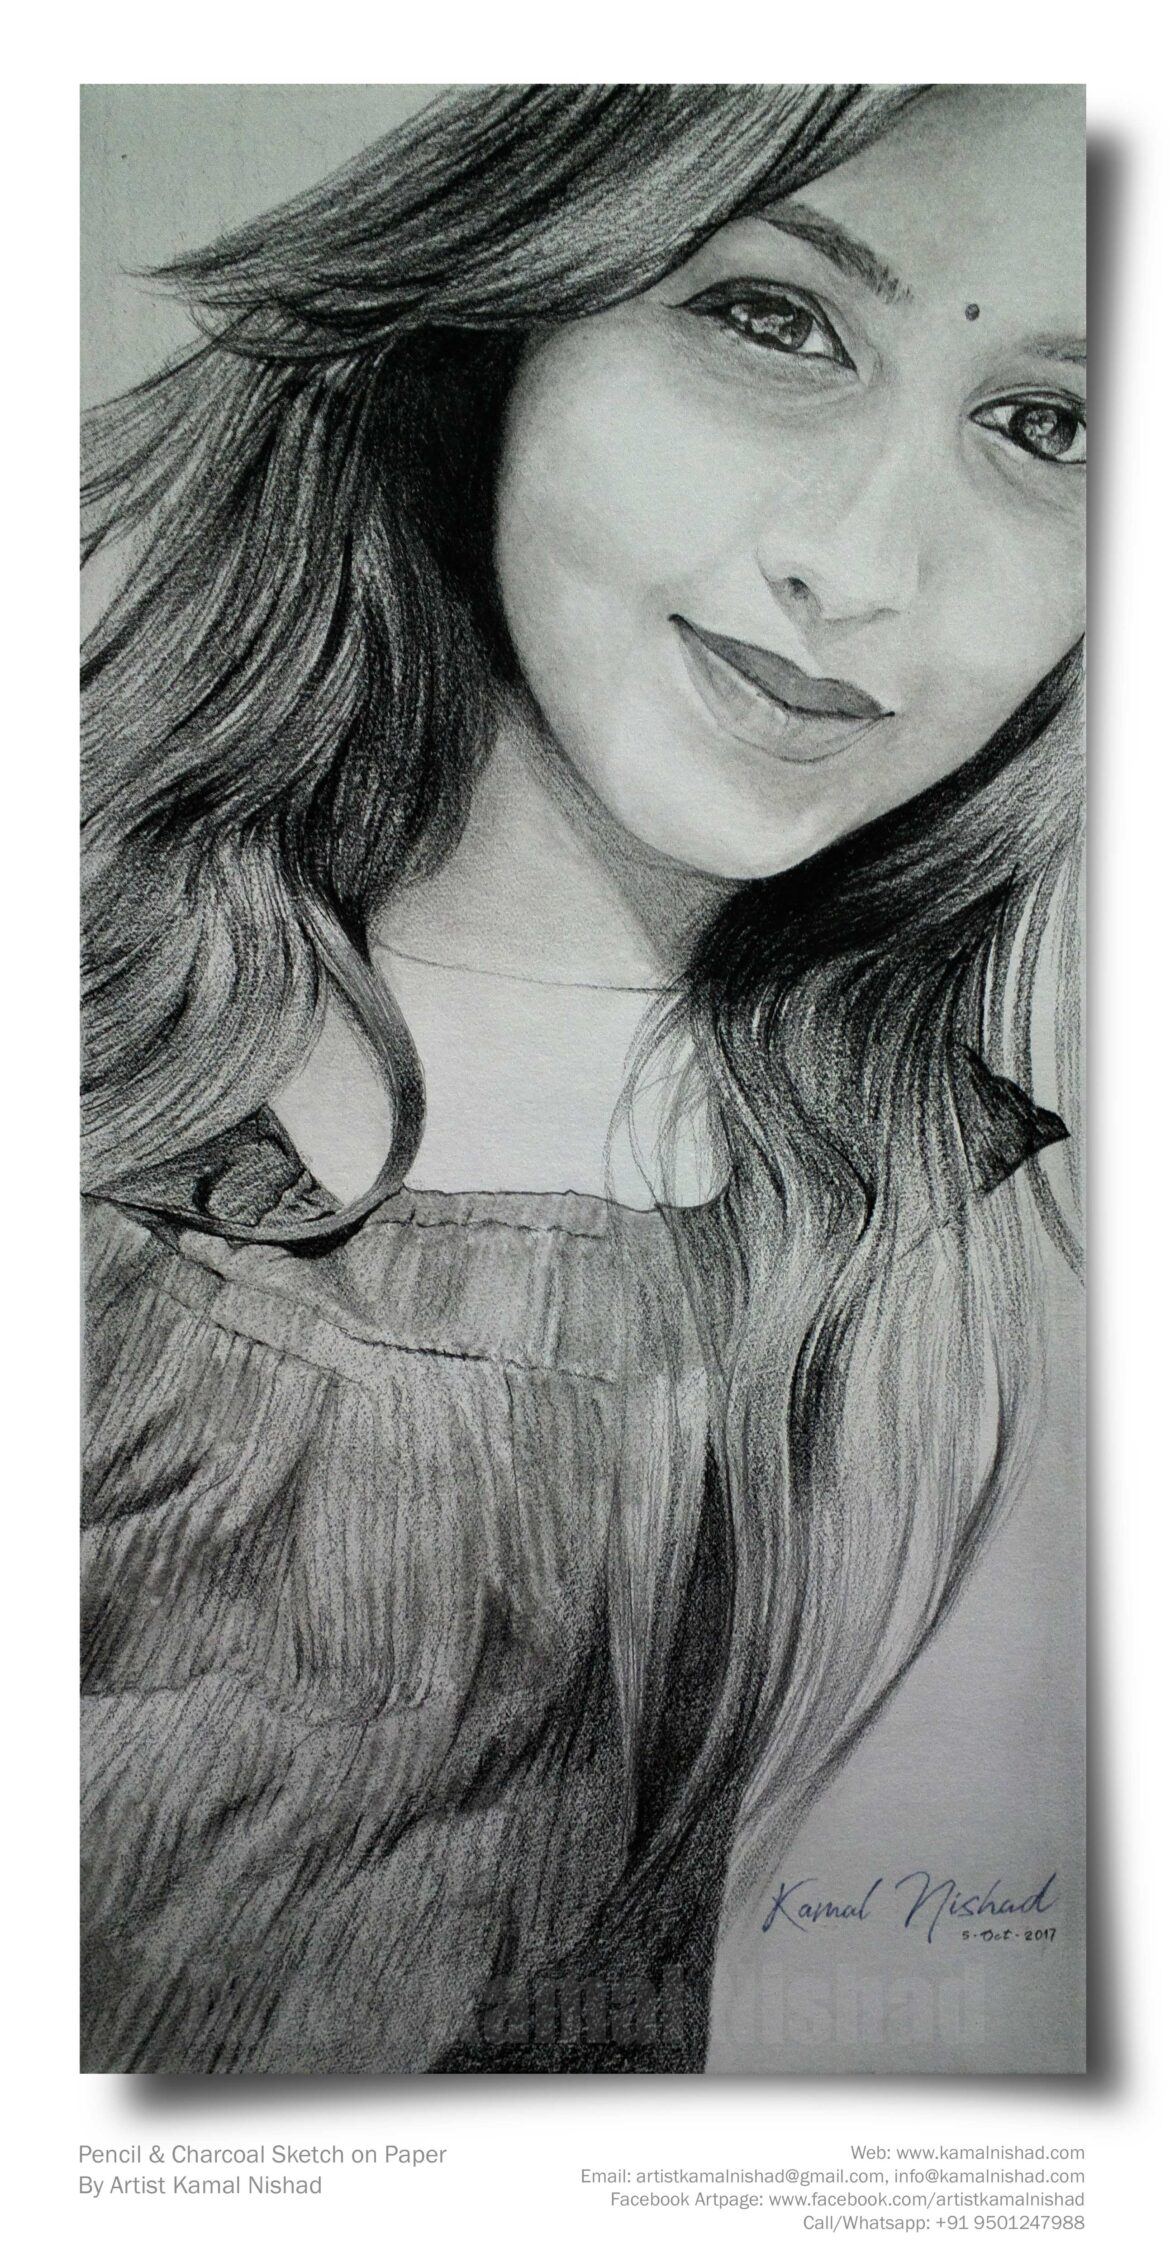 A BEAUTIFUL GIRL HS | Pencil & Charcoal Sketch This is a Handmade Pencil & Charcoal Sketch “HS”. Created by © Kamal Nishad. All rights reserved.